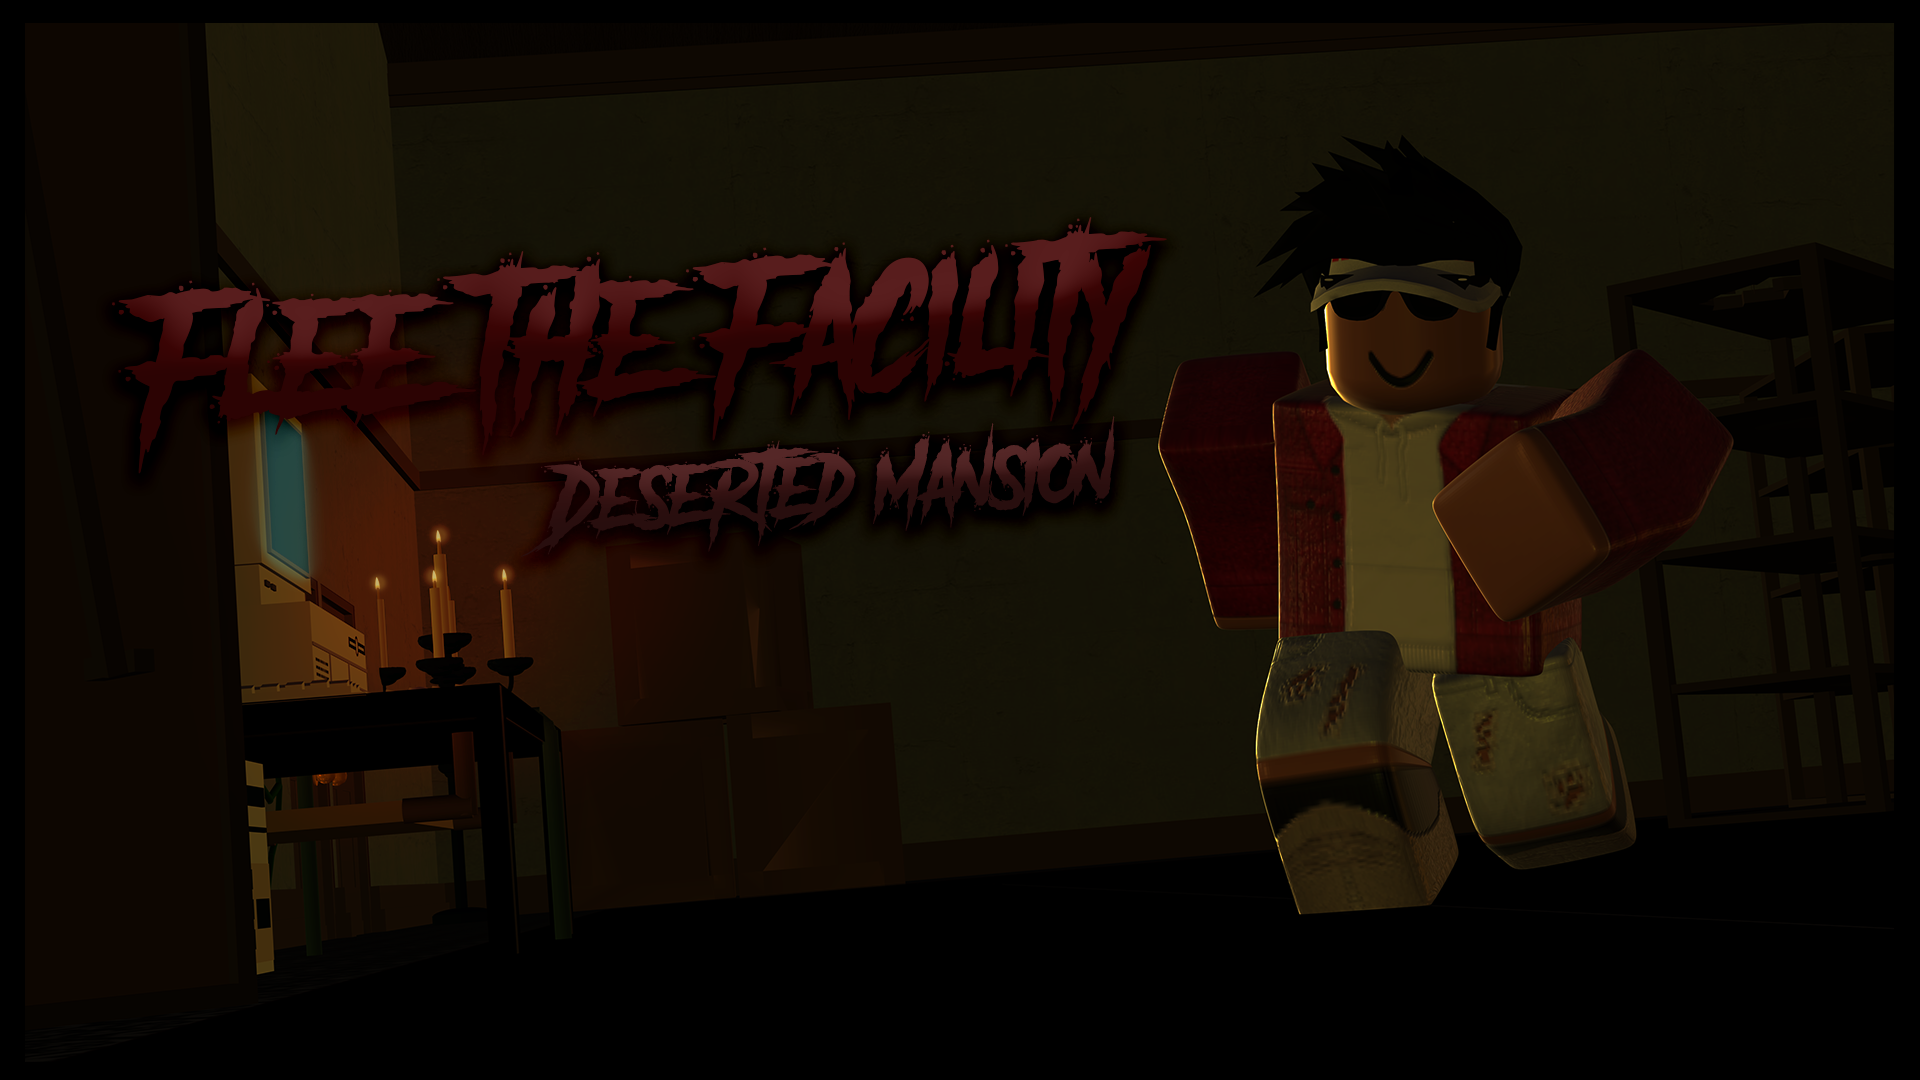 Roblox Gfx Flee The Facility Deserted Mansion By Tackynicerblx On Deviantart - roblox com flee the facility